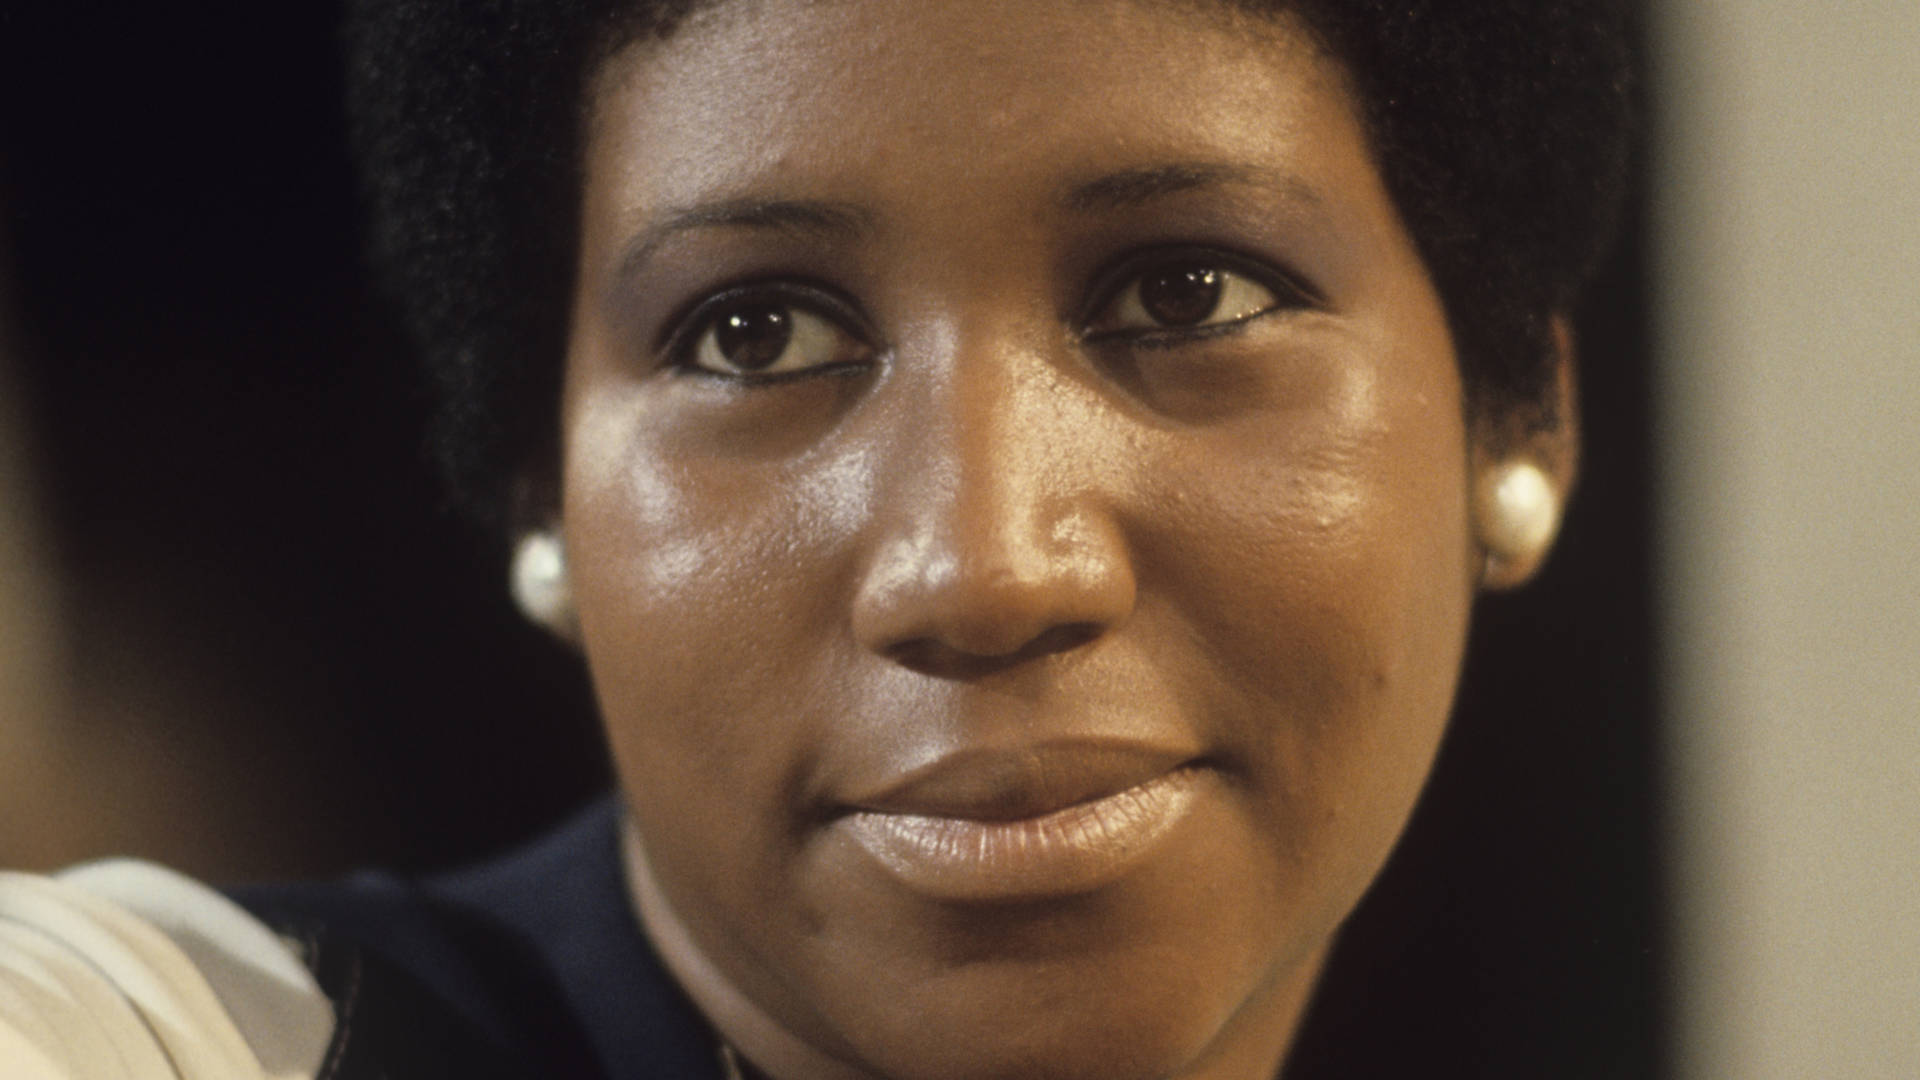 Aretha Franklin, pictured during a television appearance in January 1972, the same month in which the project Amazing Grace was recorded. ABC Photo Archives/ABC via Getty Images